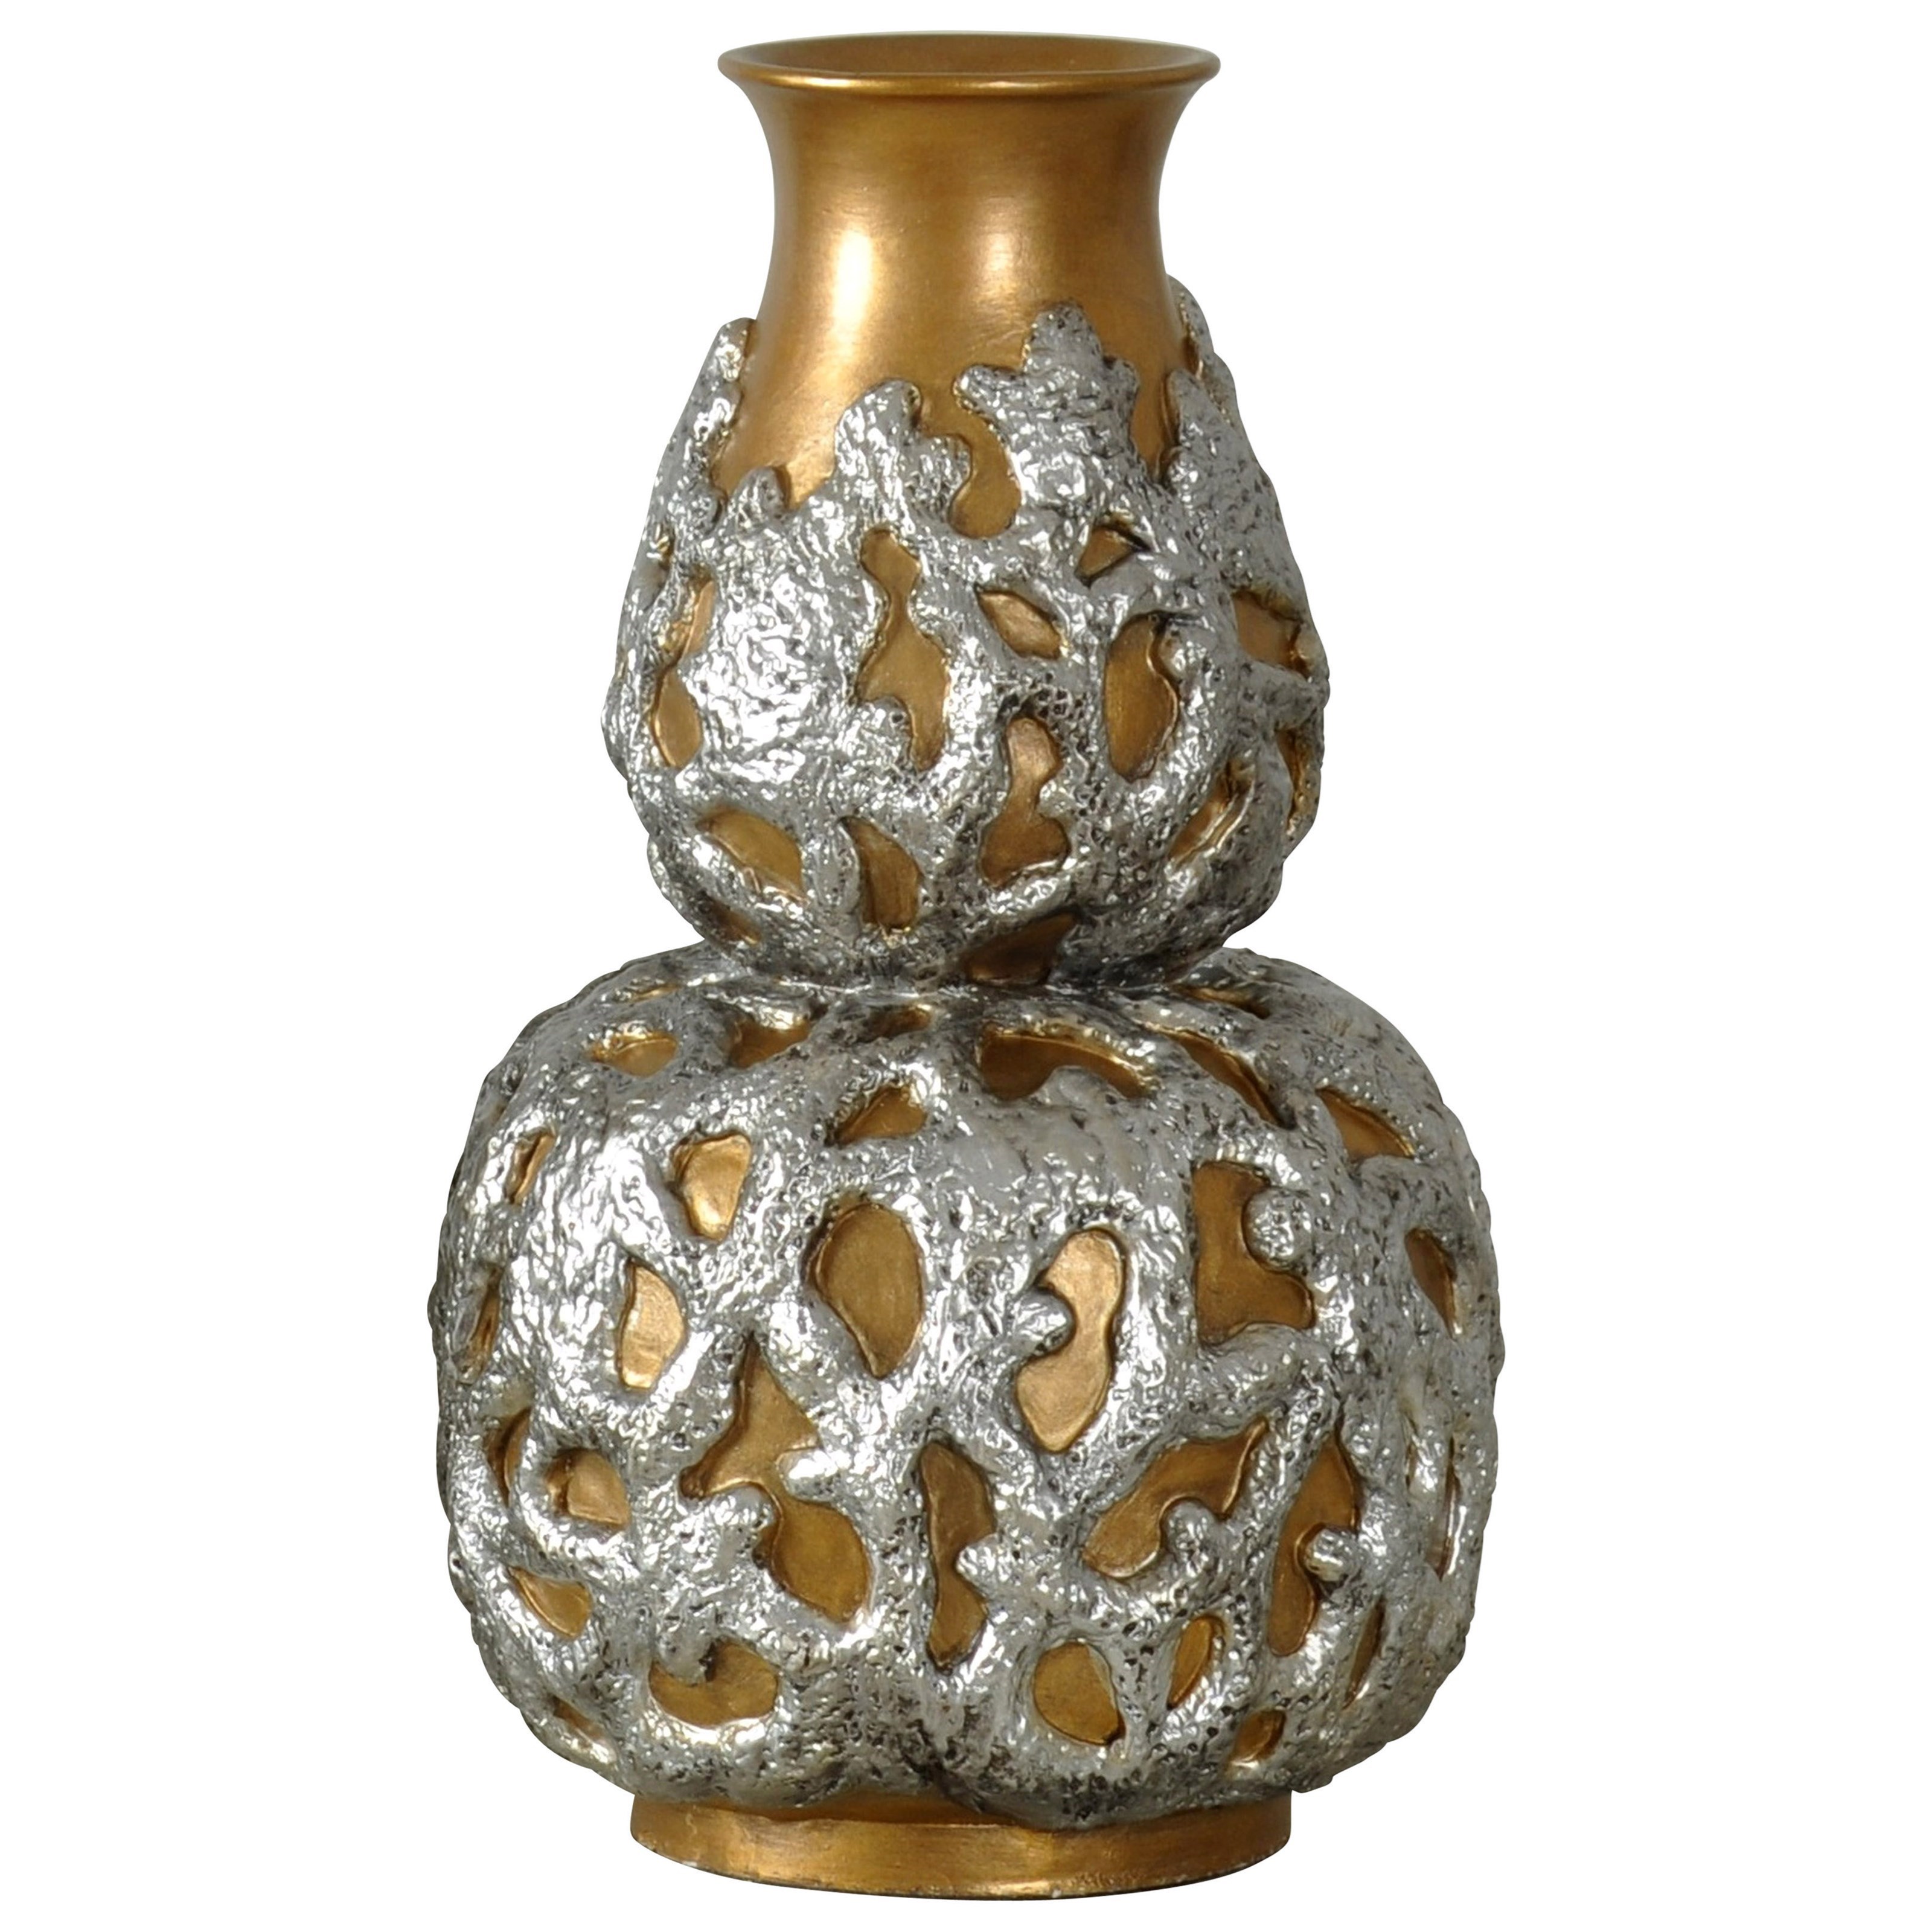 Small Reef-Patterned Resin Vase